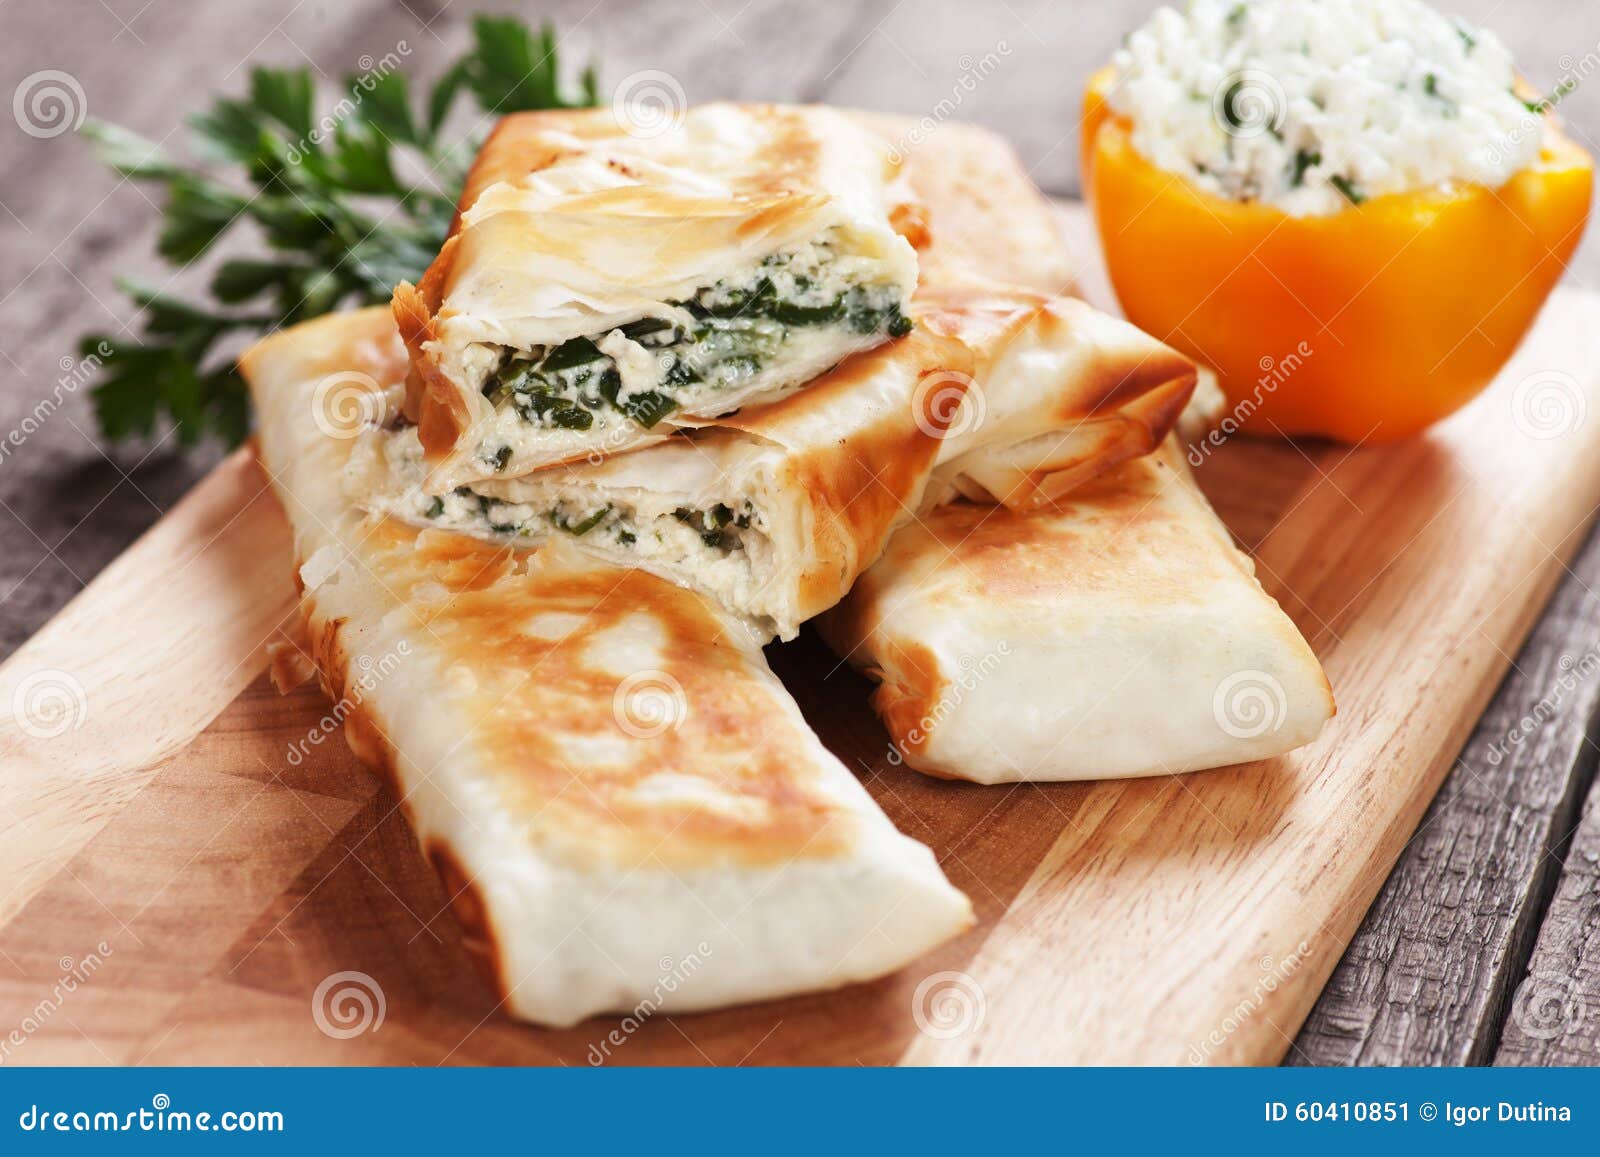 borek with chard and cheese filling